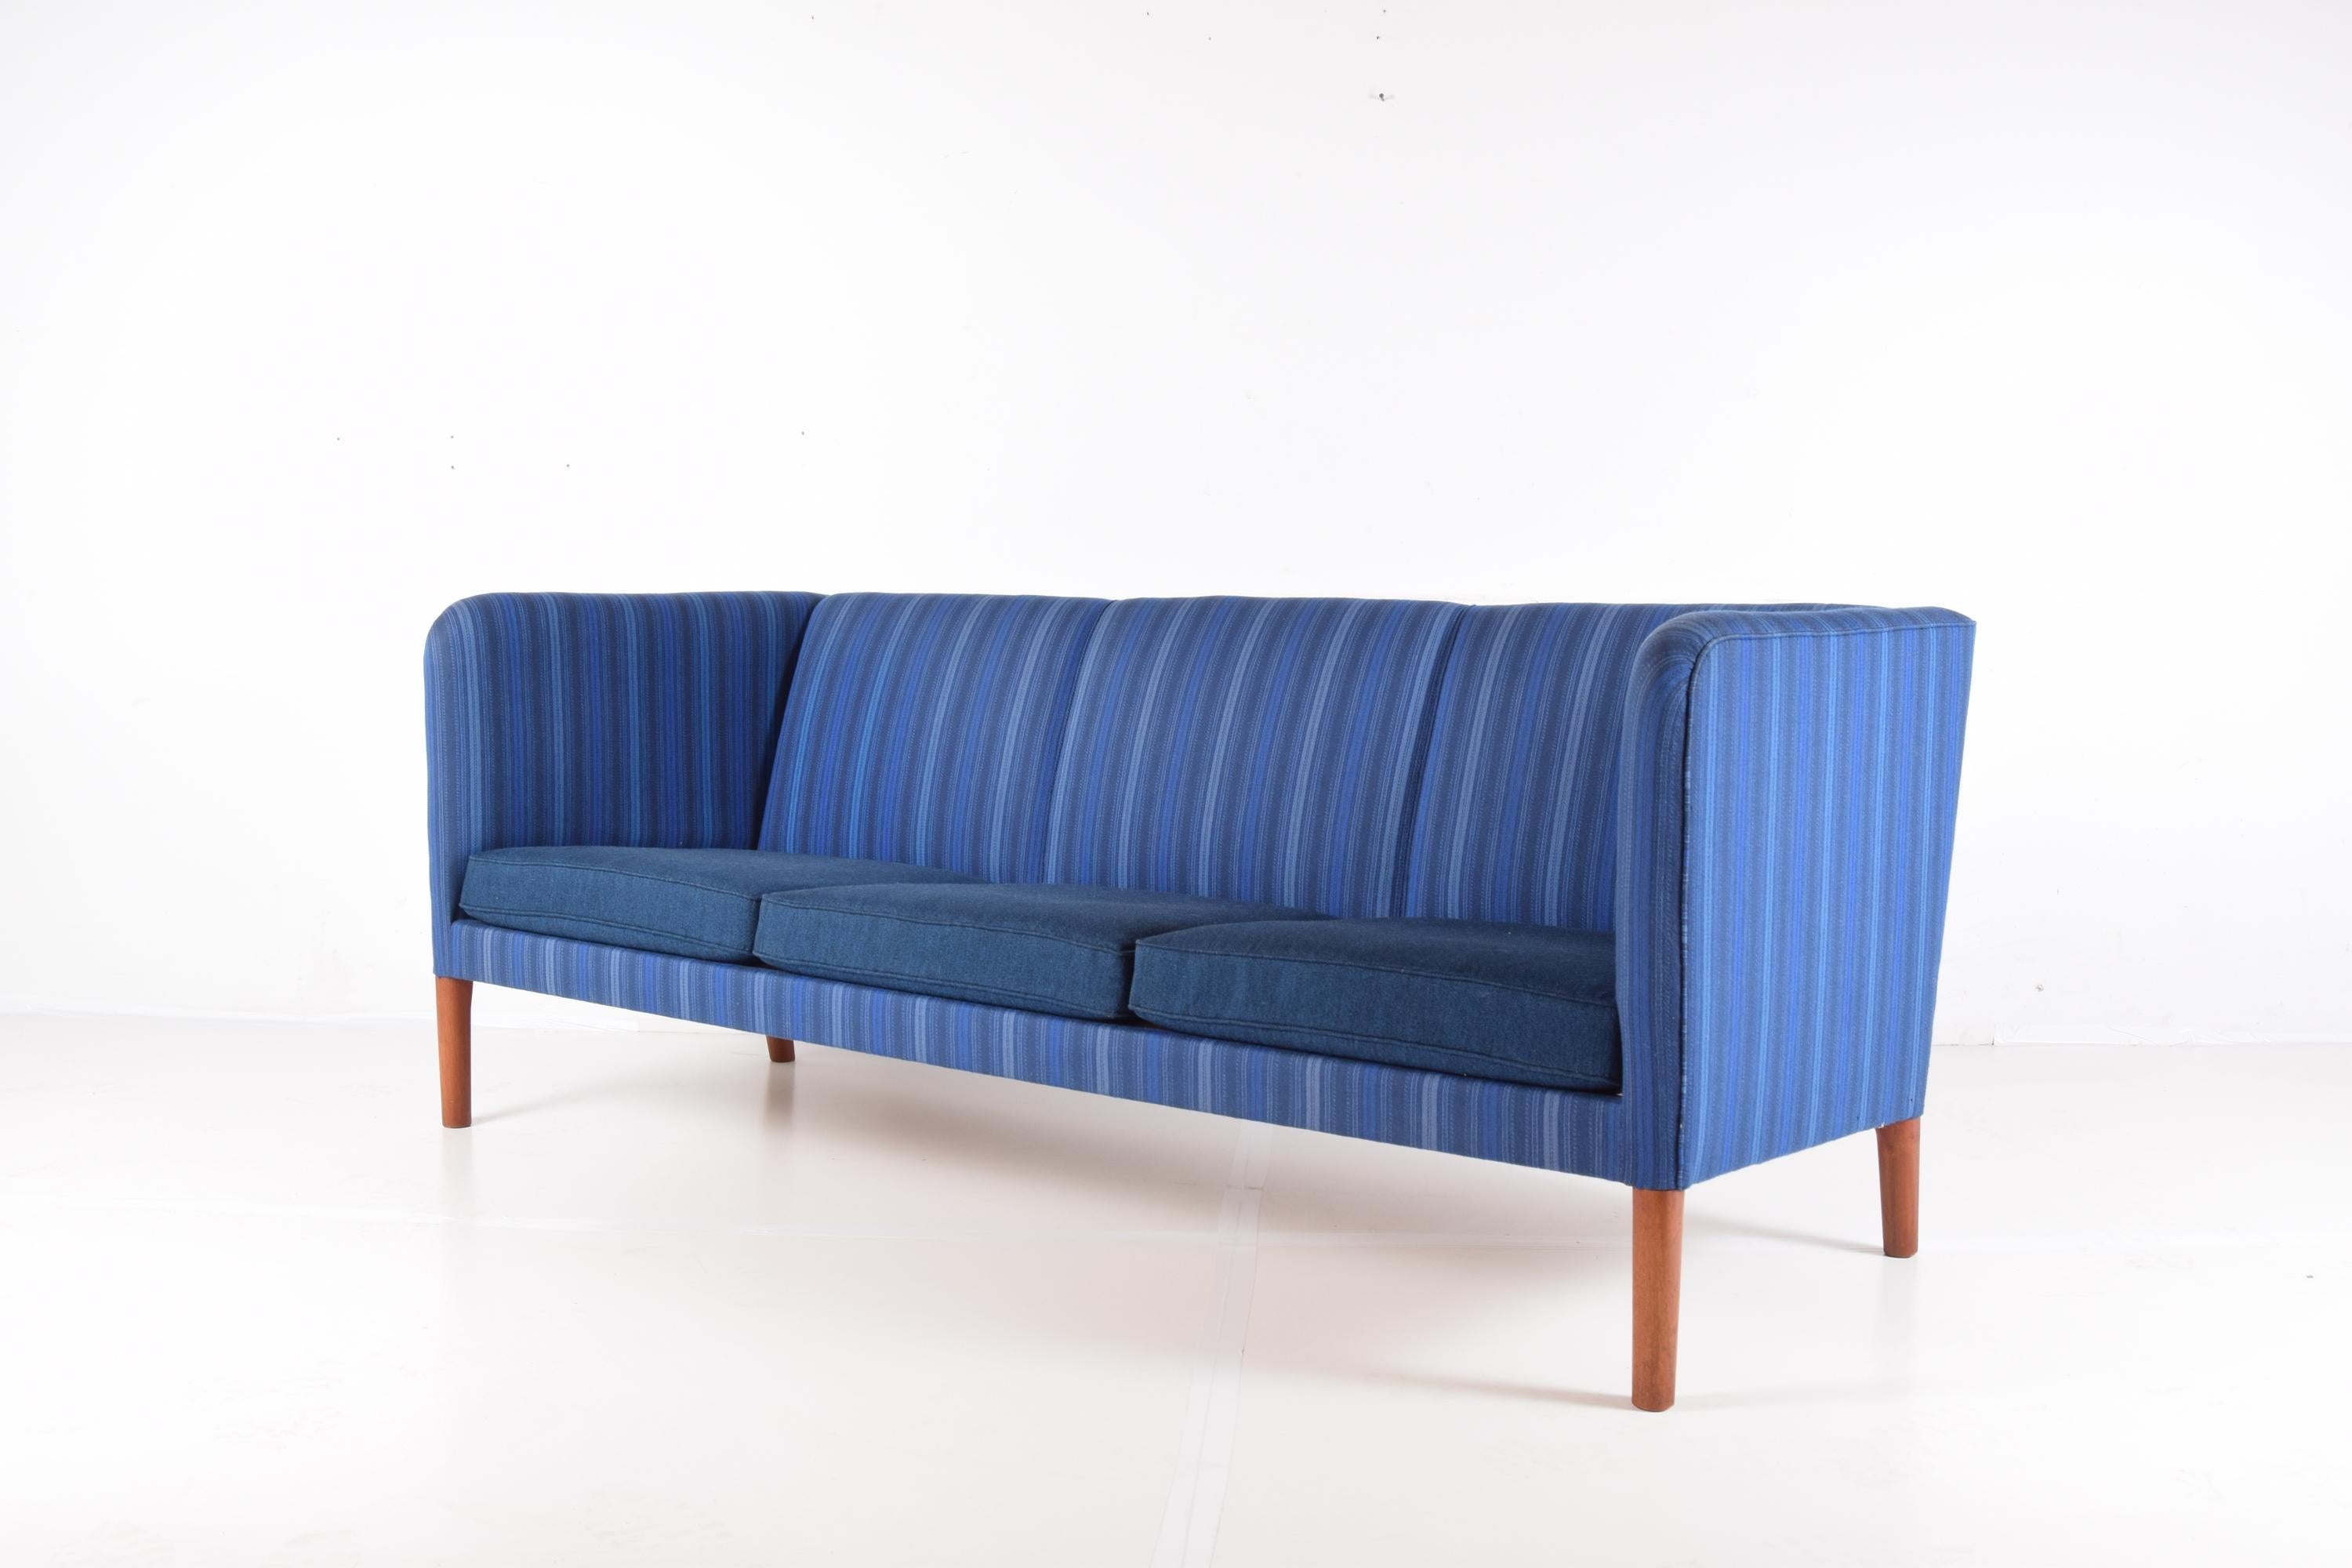 Elegant even arm sofa on tapered teak legs, designed by Hans J. Wegner, circa 1955. This example, produced by the workshop of A.P. Stolen, Denmark, circa 1971. Purchased from original owner who imported it from Copenhagen in 1971. Upholstered in the